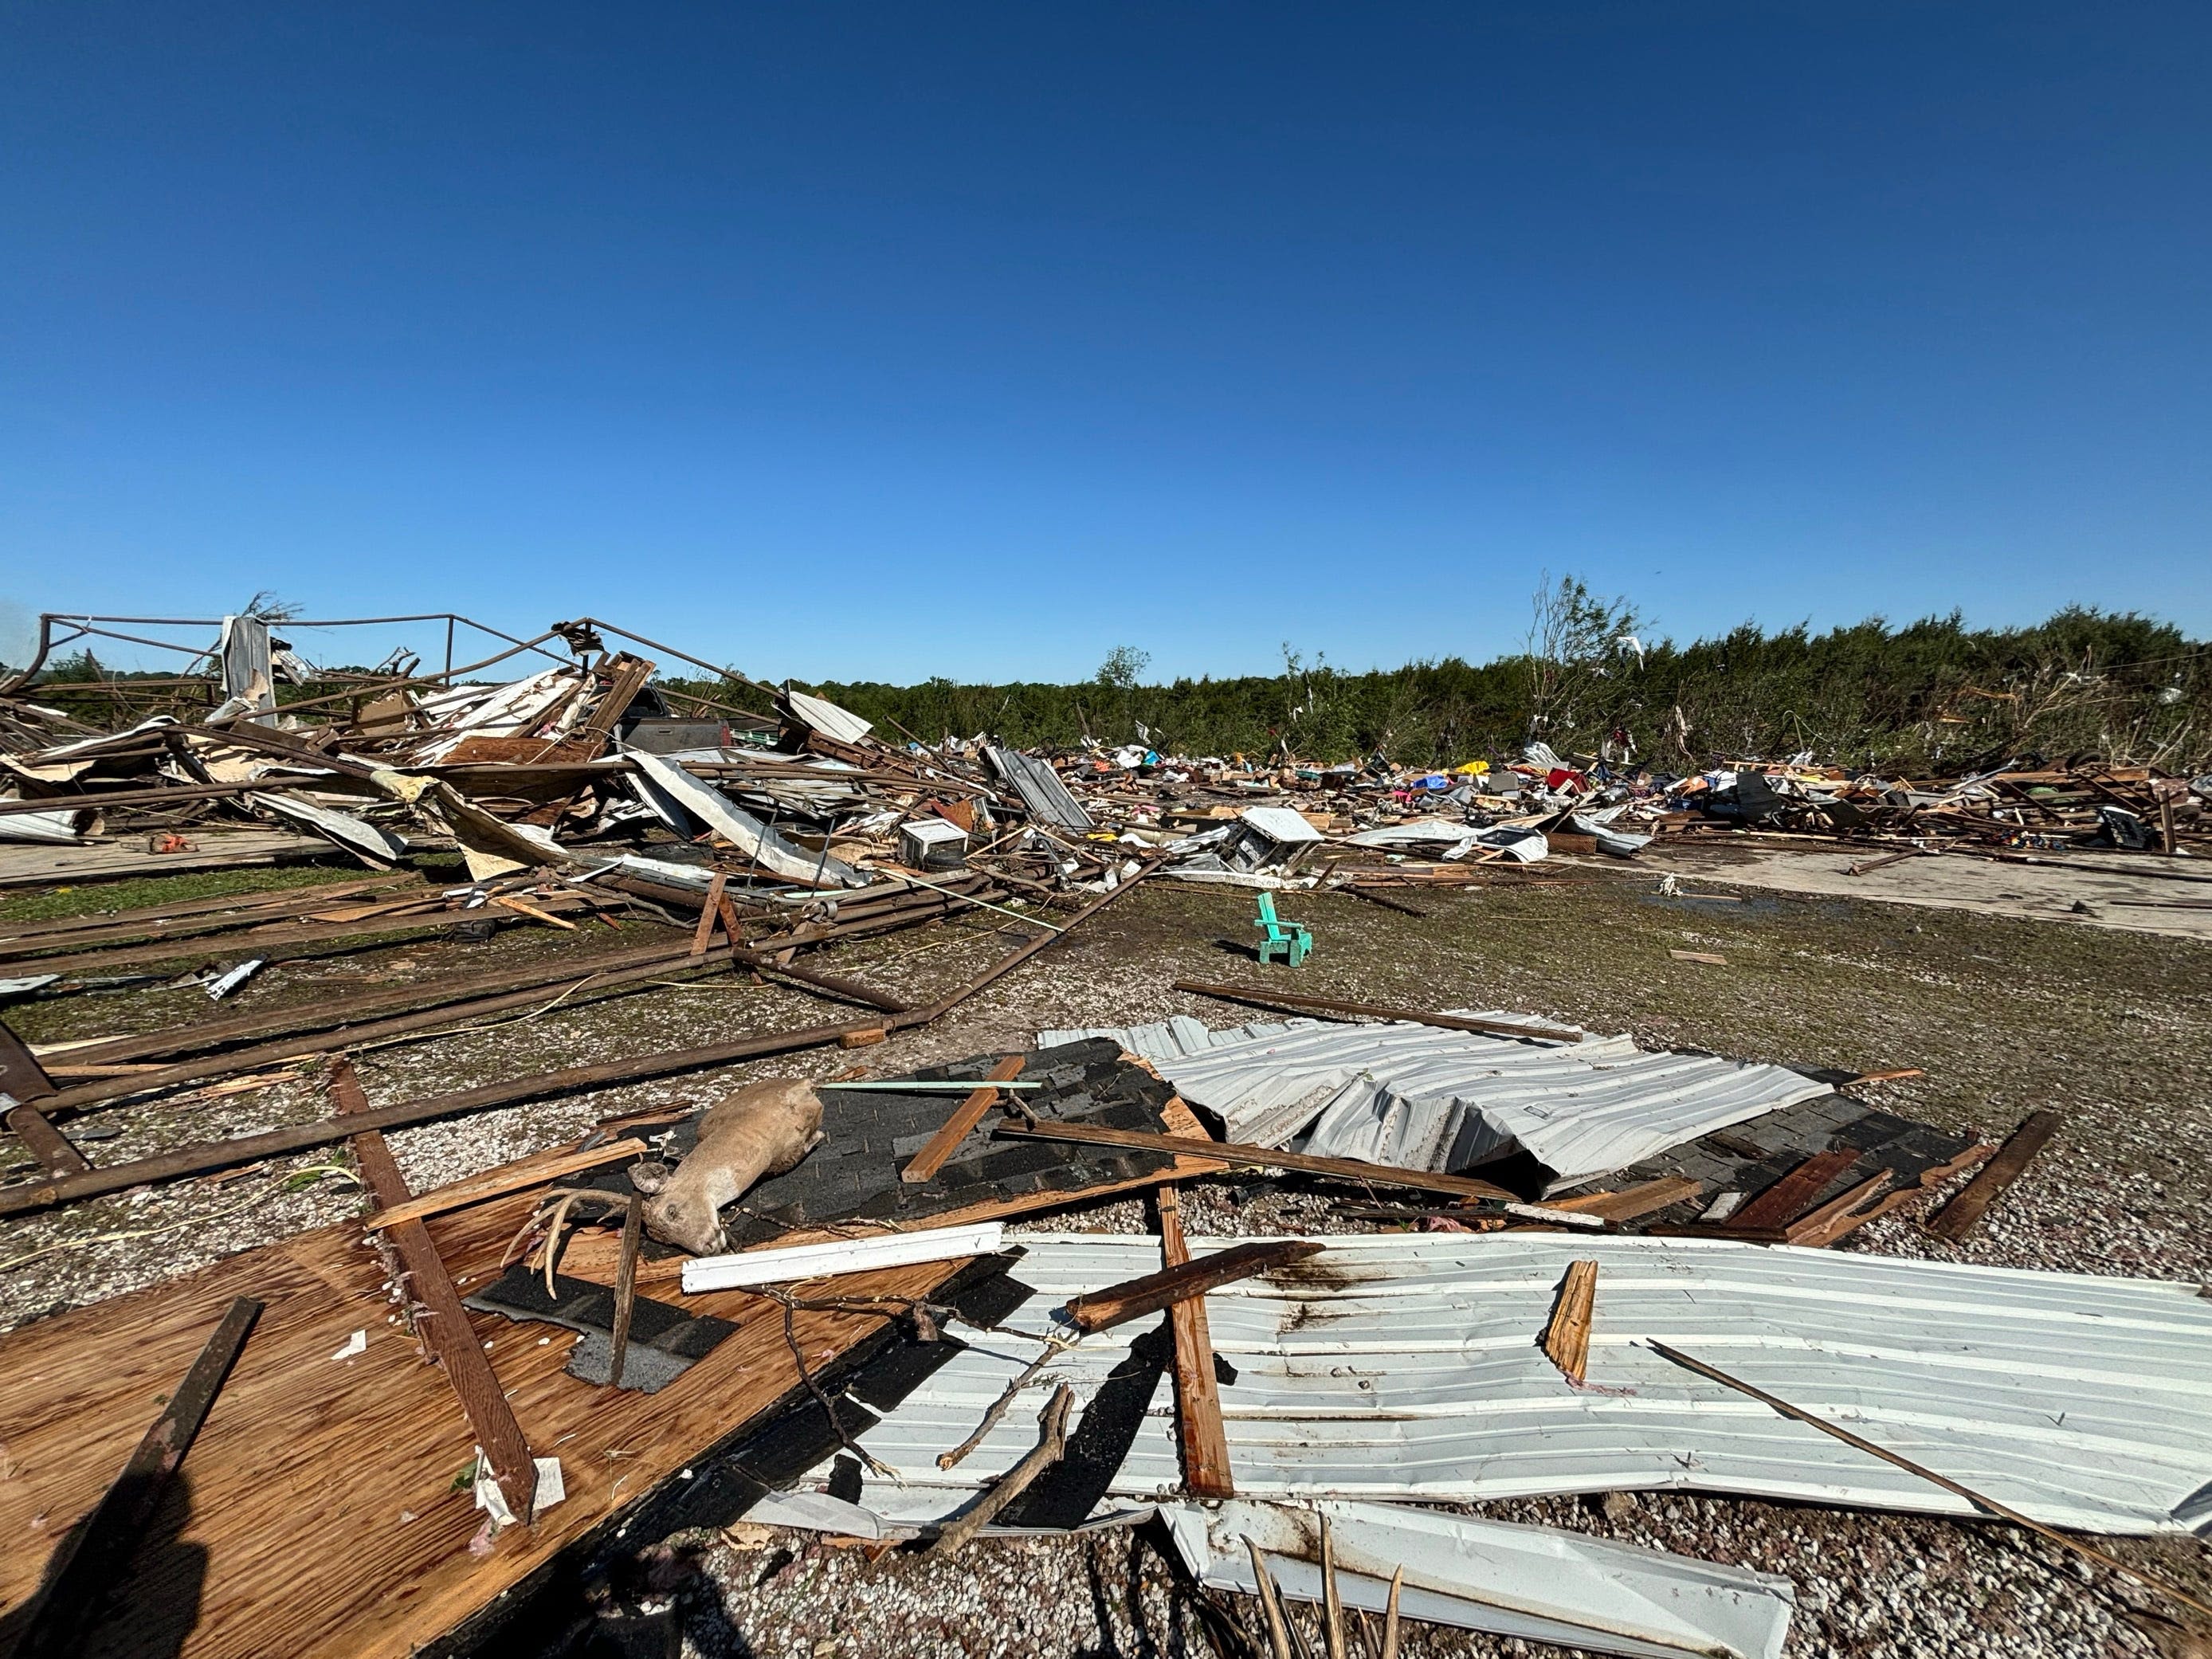 Deadly tornadoes in Oklahoma last night: One dead, thousands without power near Barnsdall